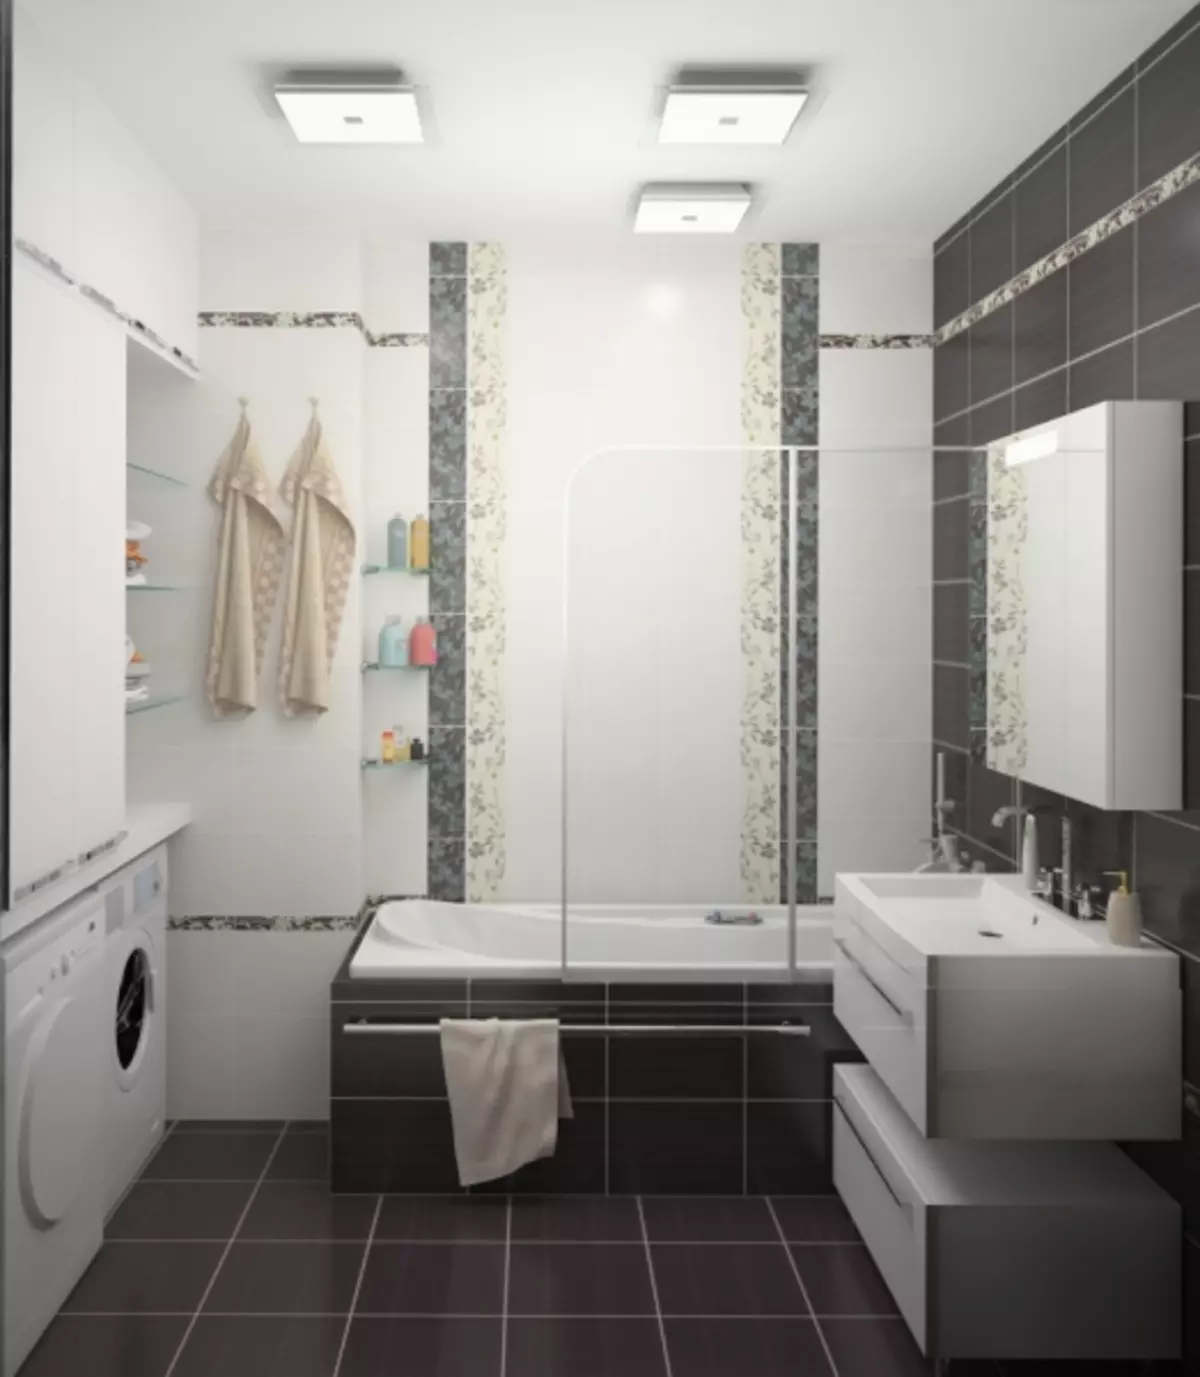 Little bathroom design: solve the problem competently